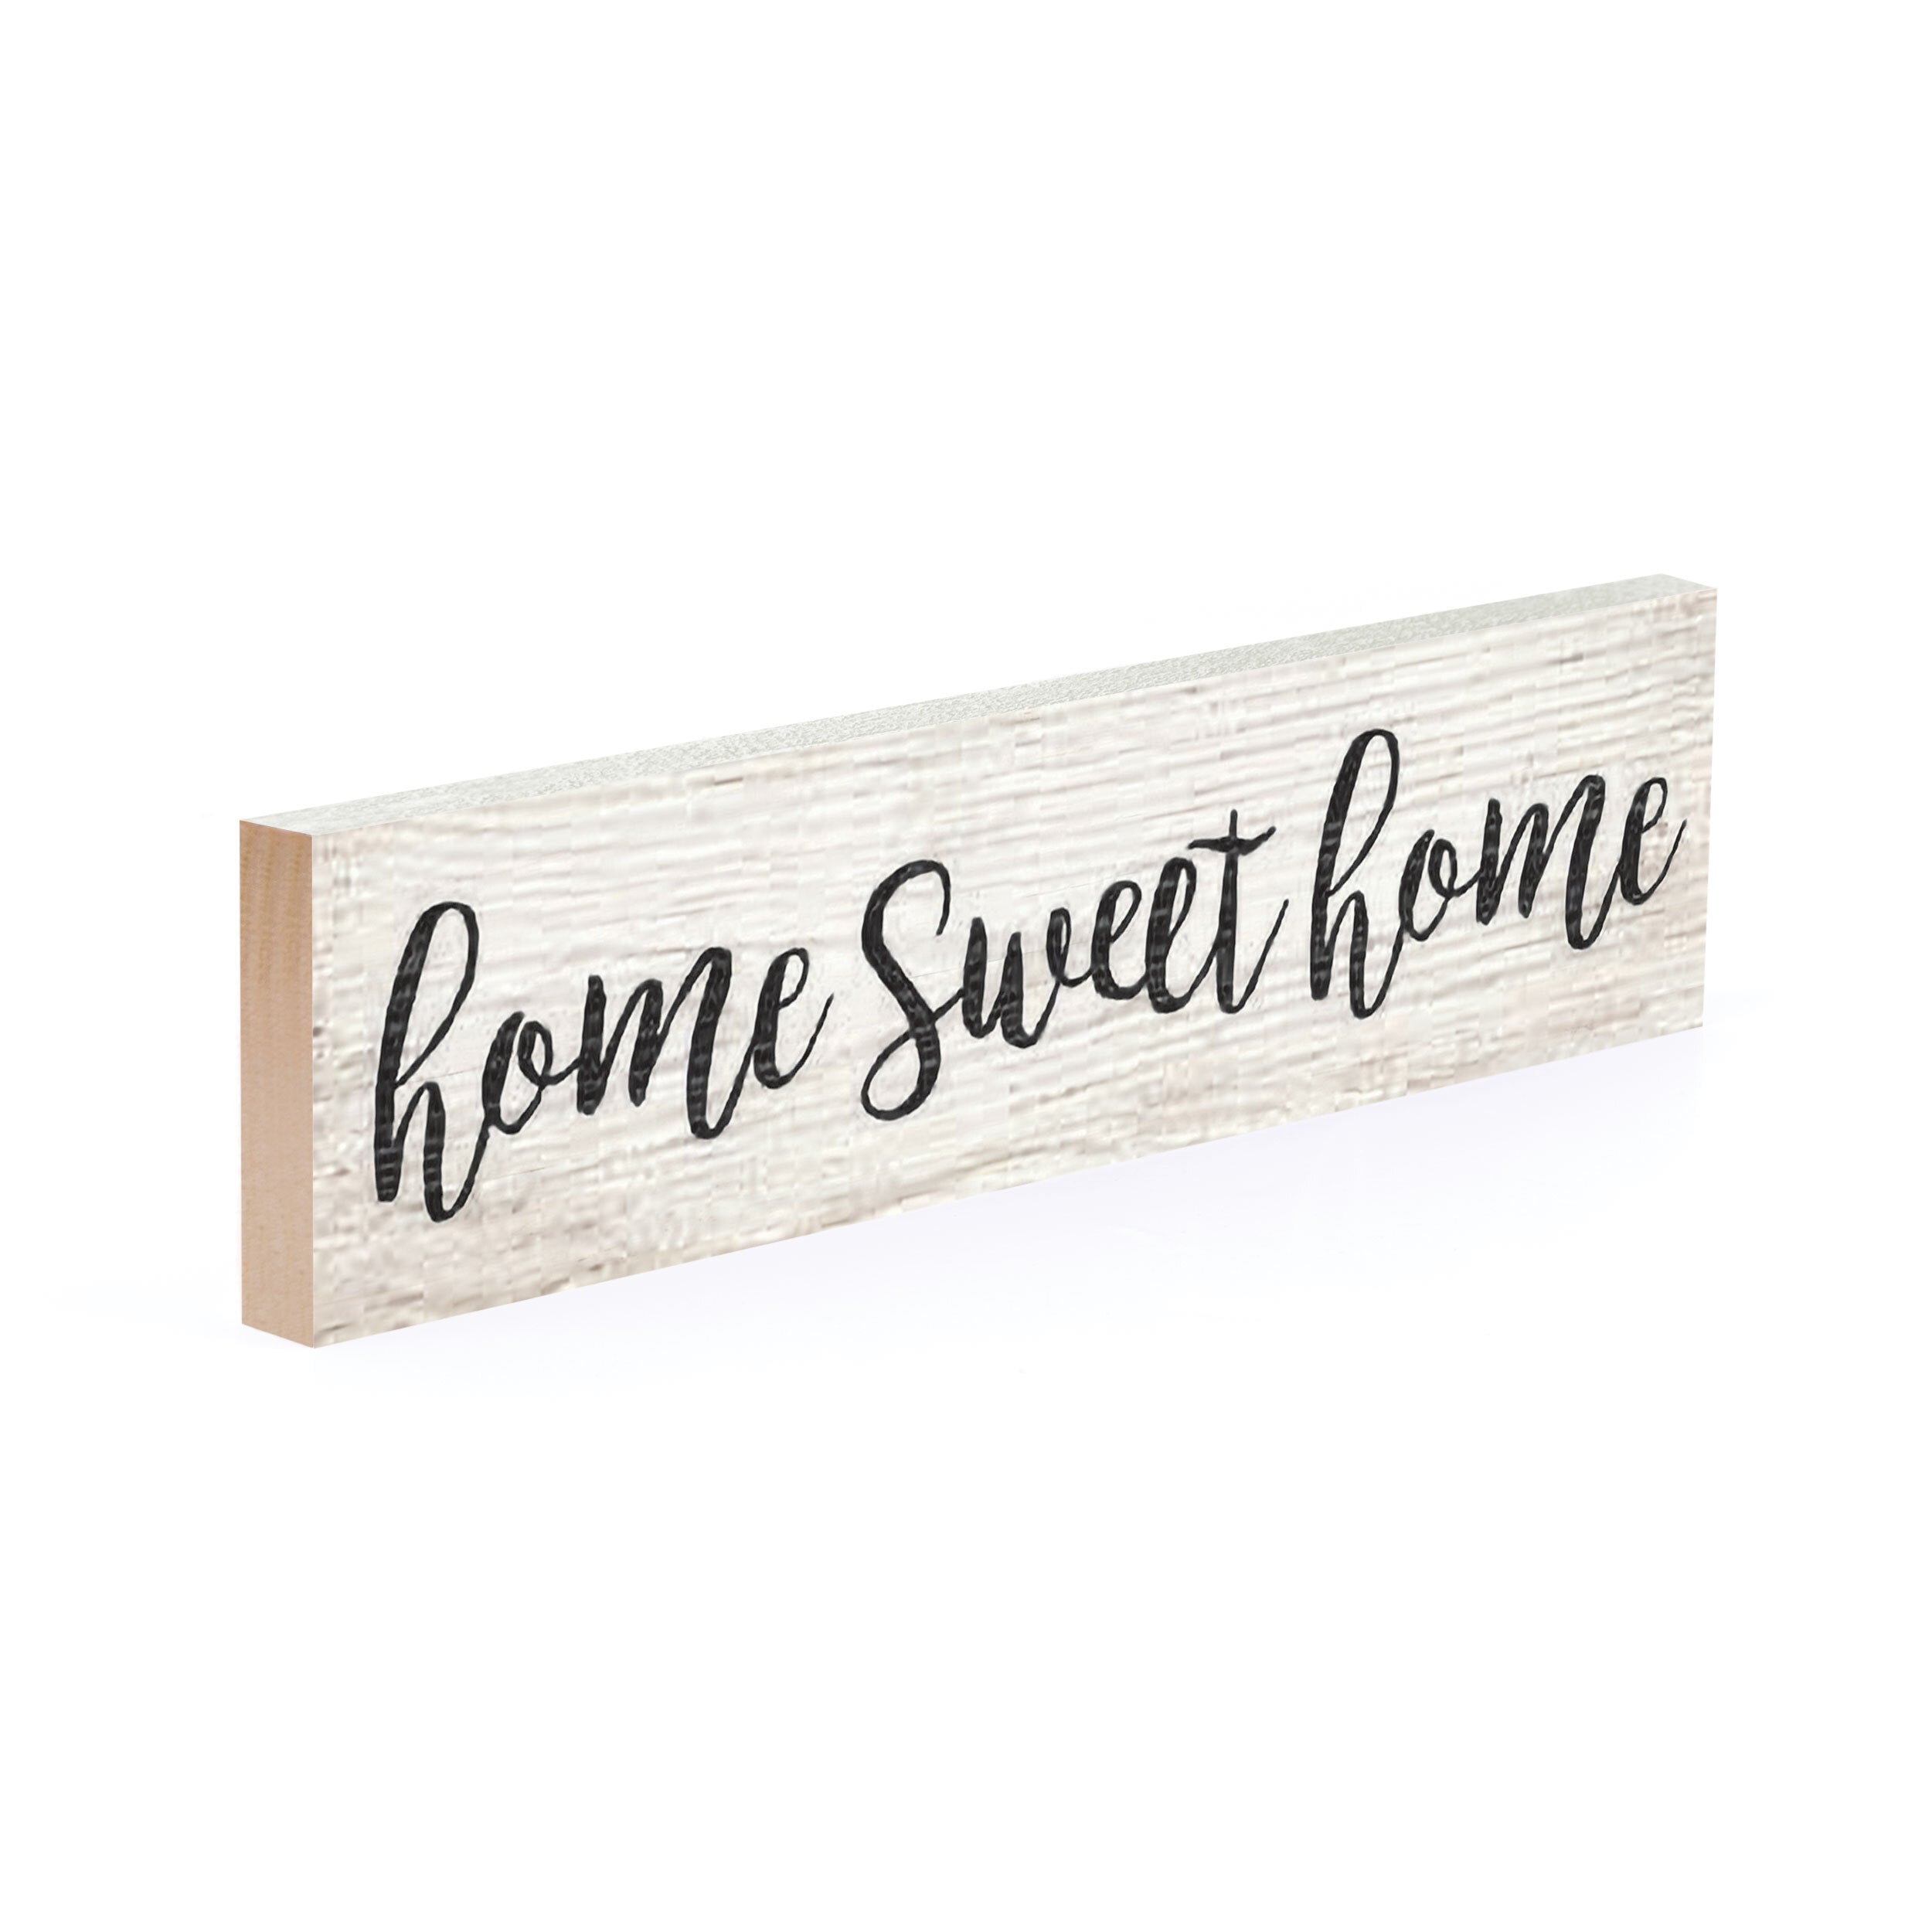 **Home Sweet Home Small Sign